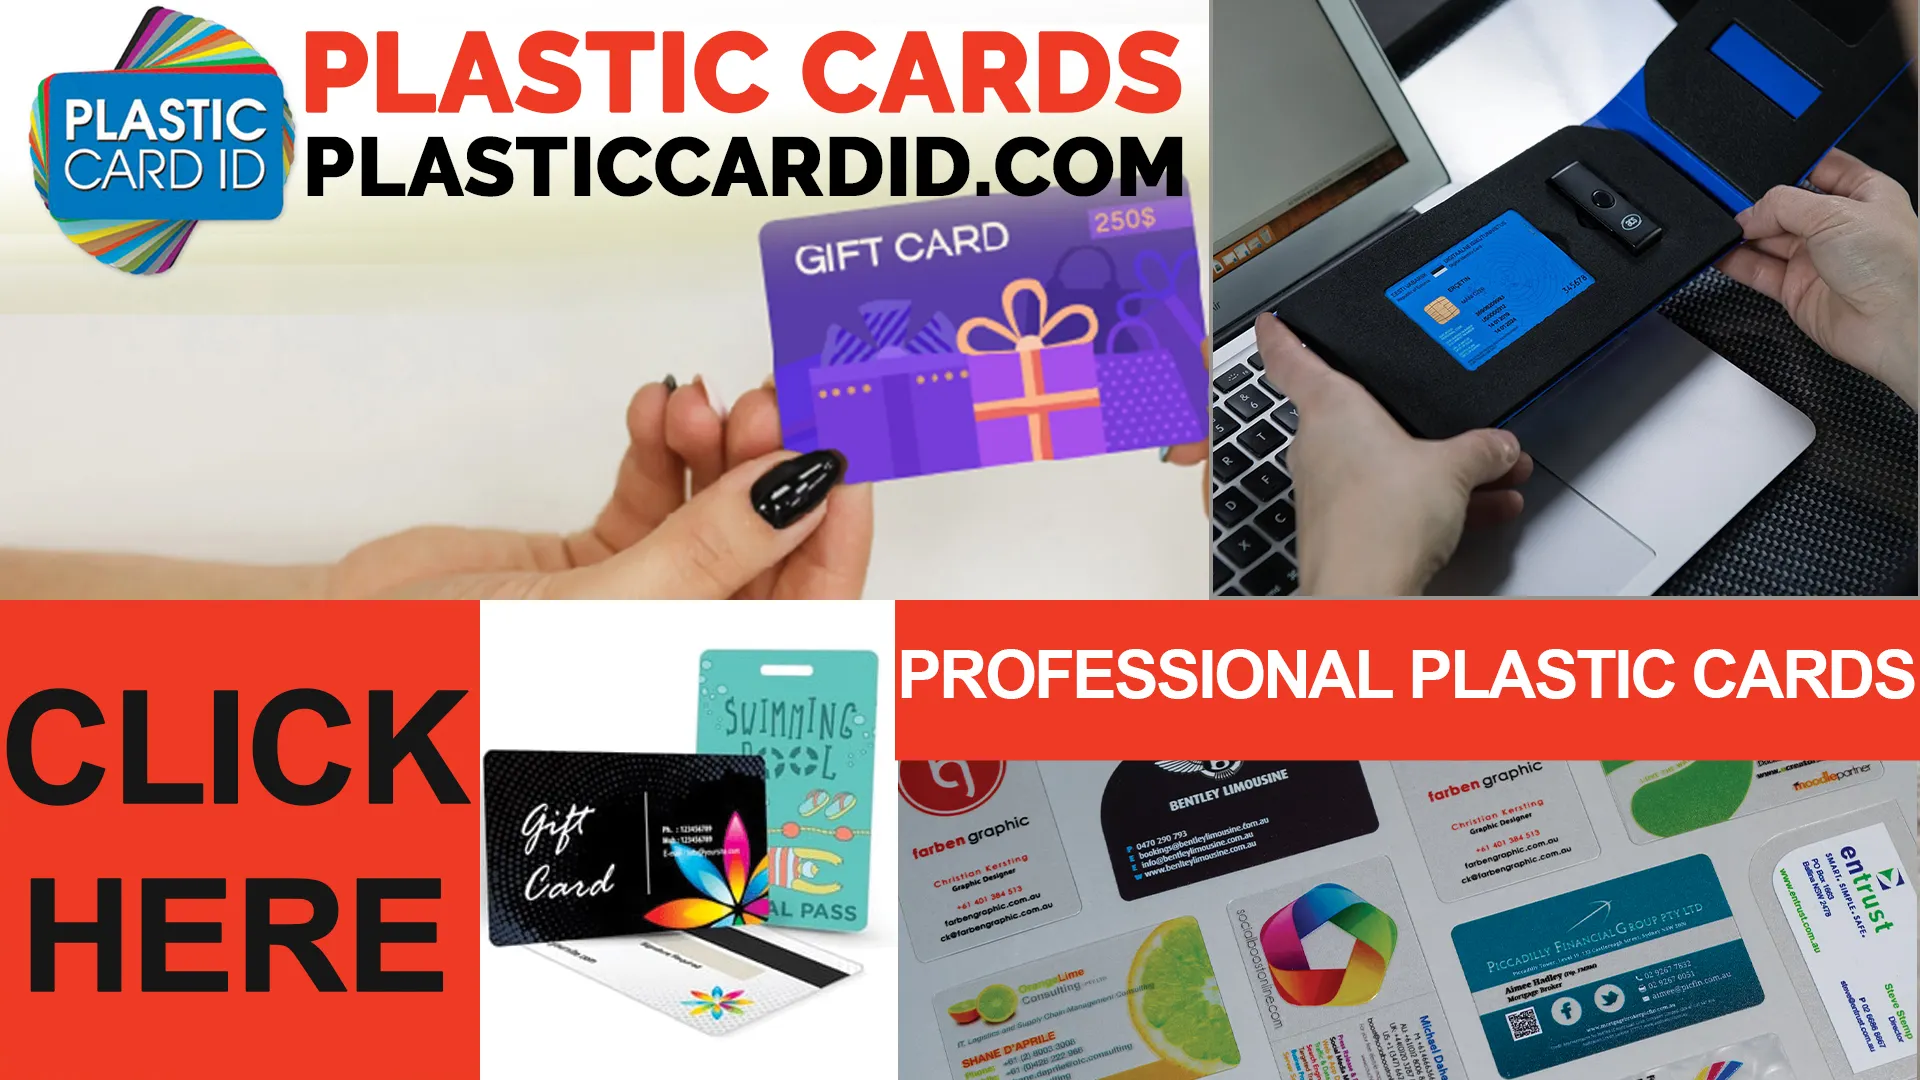 Welcome to the Durable World of Plastic Cards